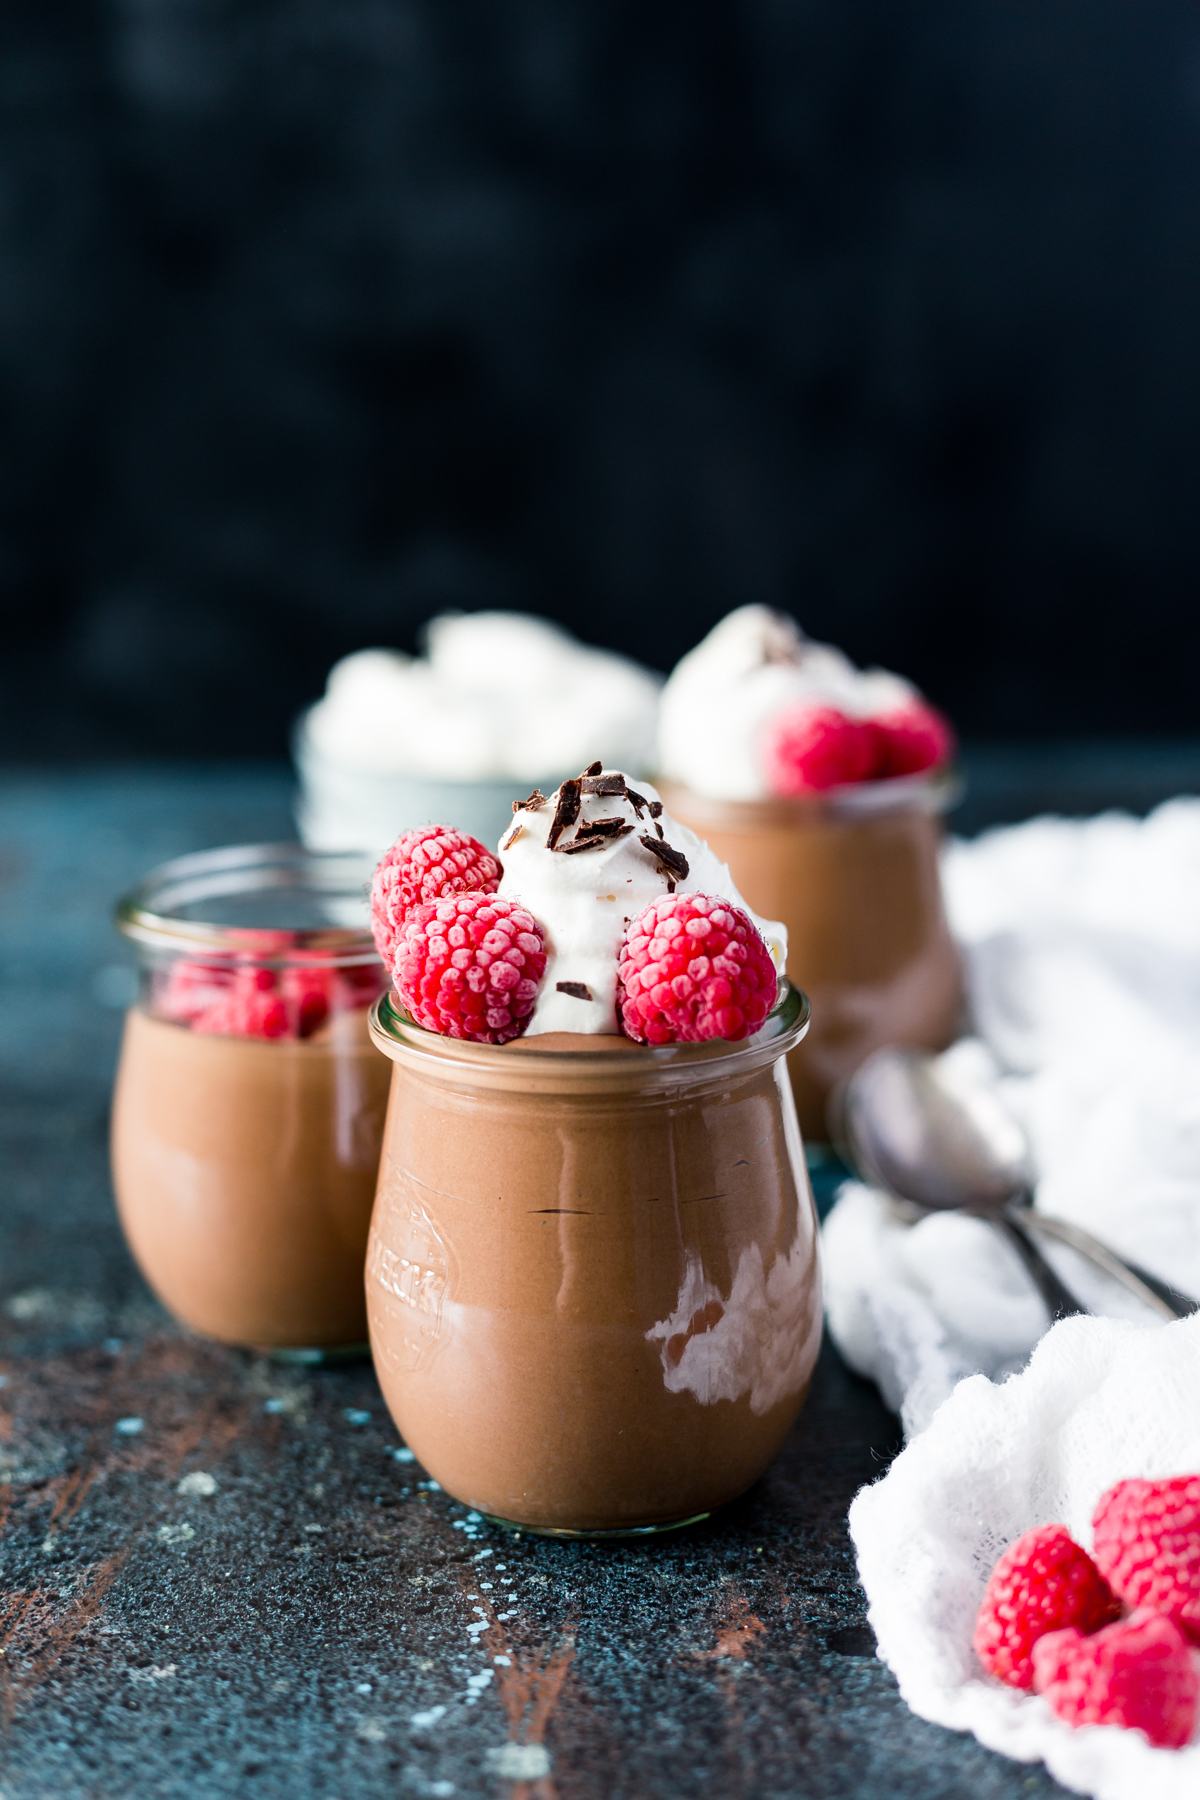 3 Ingredient Vegan Chocolate Mousse with Coconut Whipped Cream